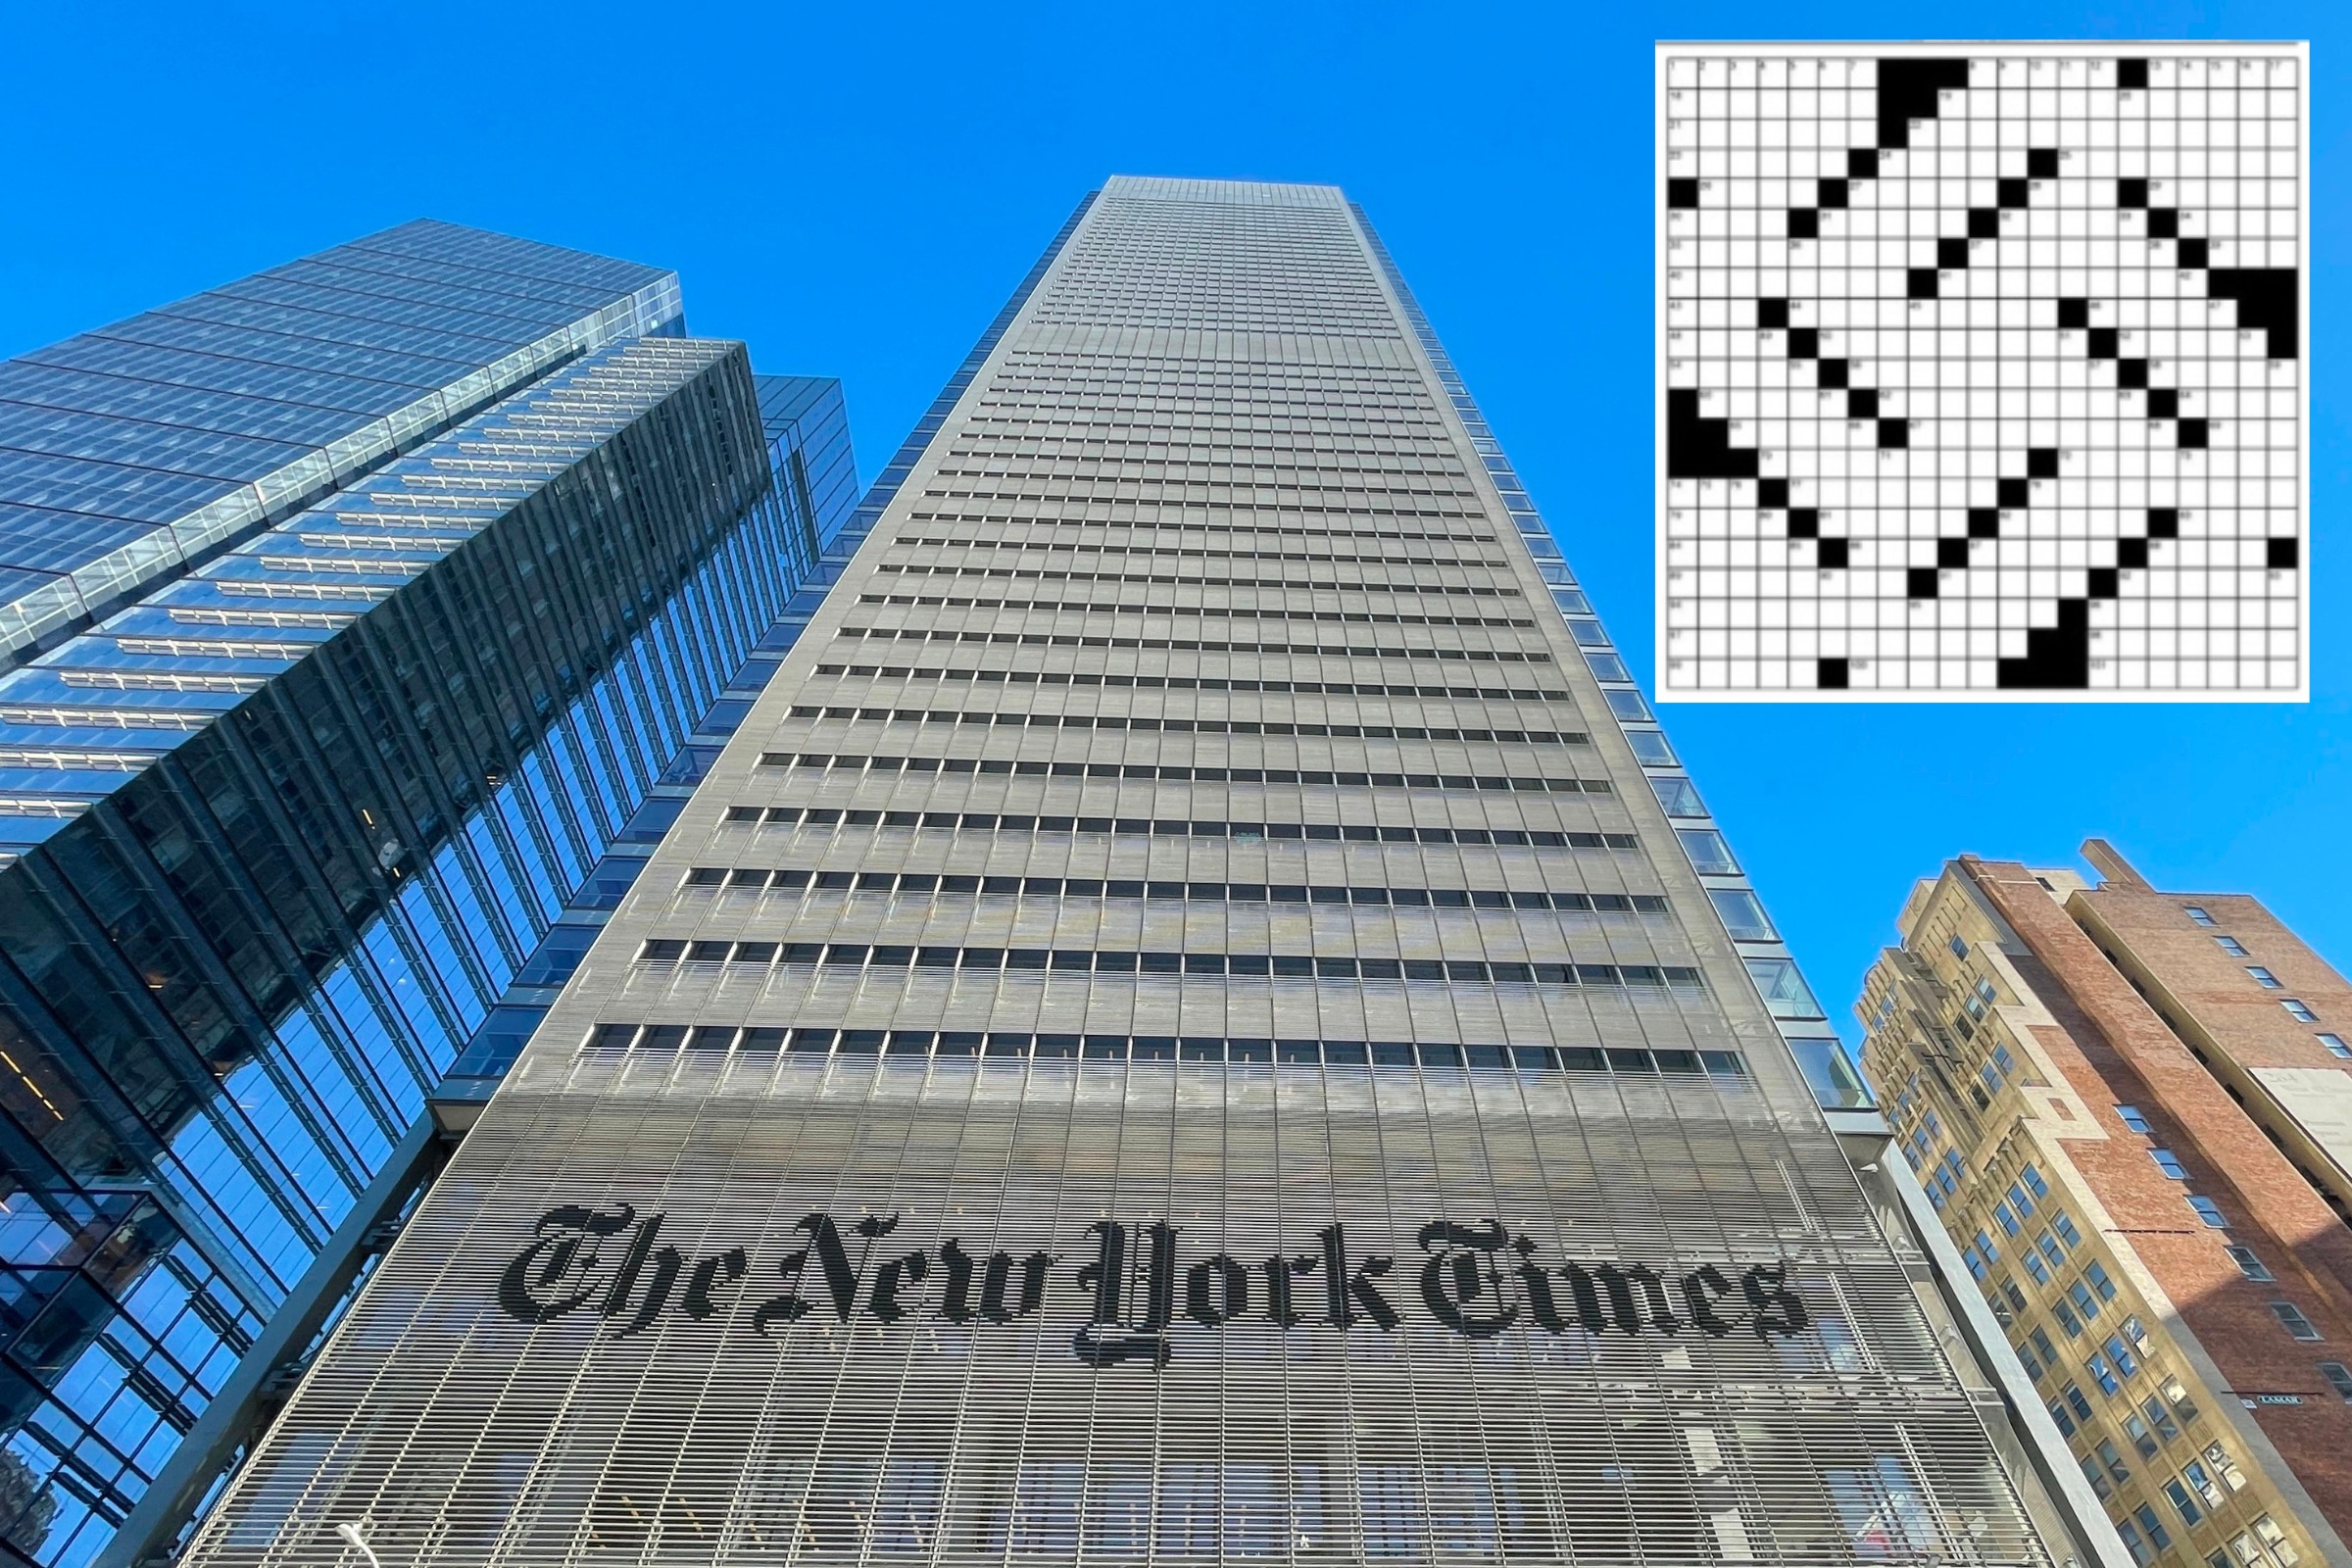 The New York Times Speaks Out on Claims Its Crossword Resembles